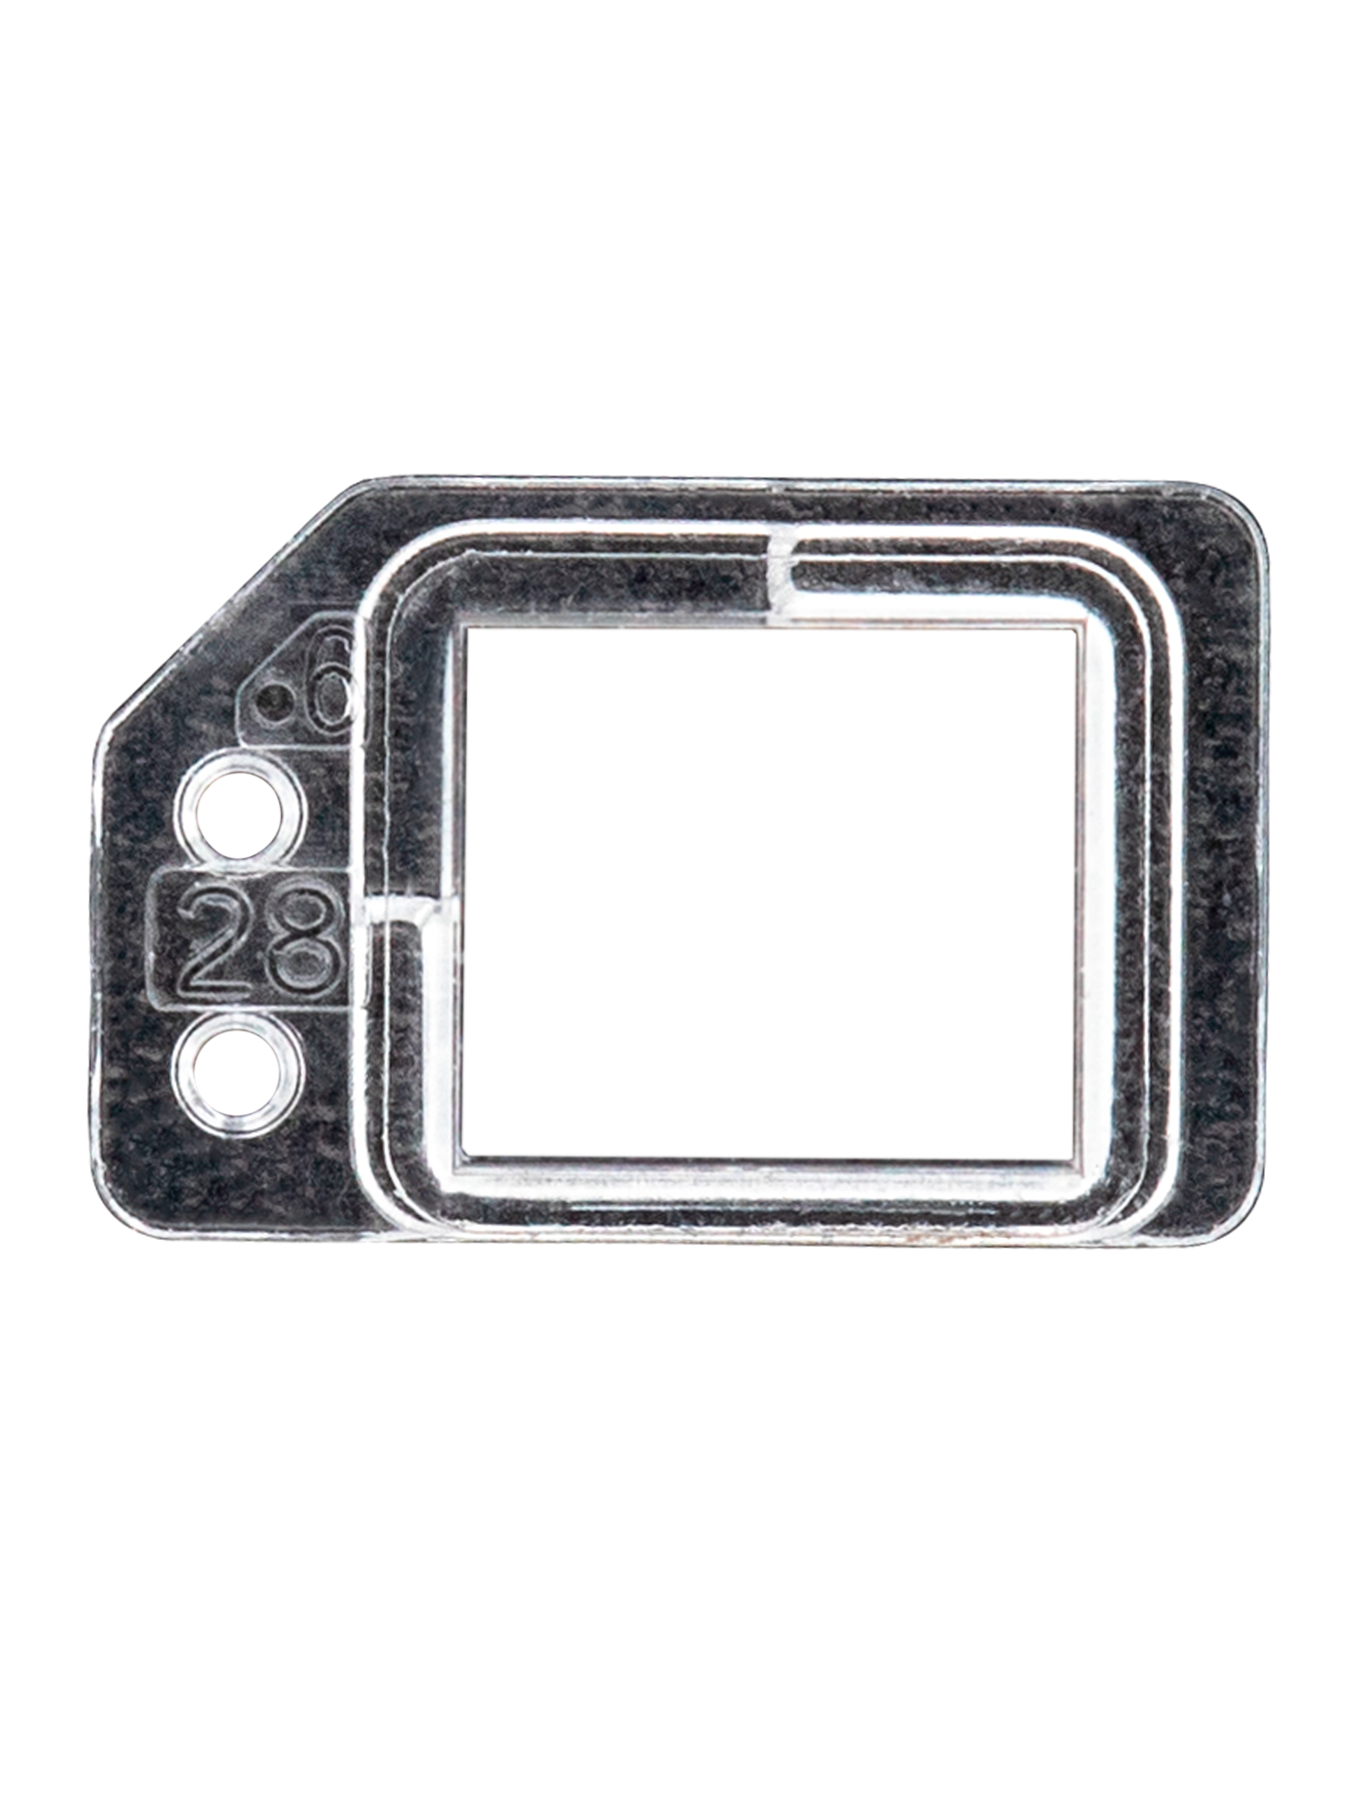 FRONT CAMERA AND PROXIMITY SCANNER PLASTIC BRACKET COMPATIBLE WITH IPHONE 6S PLUS